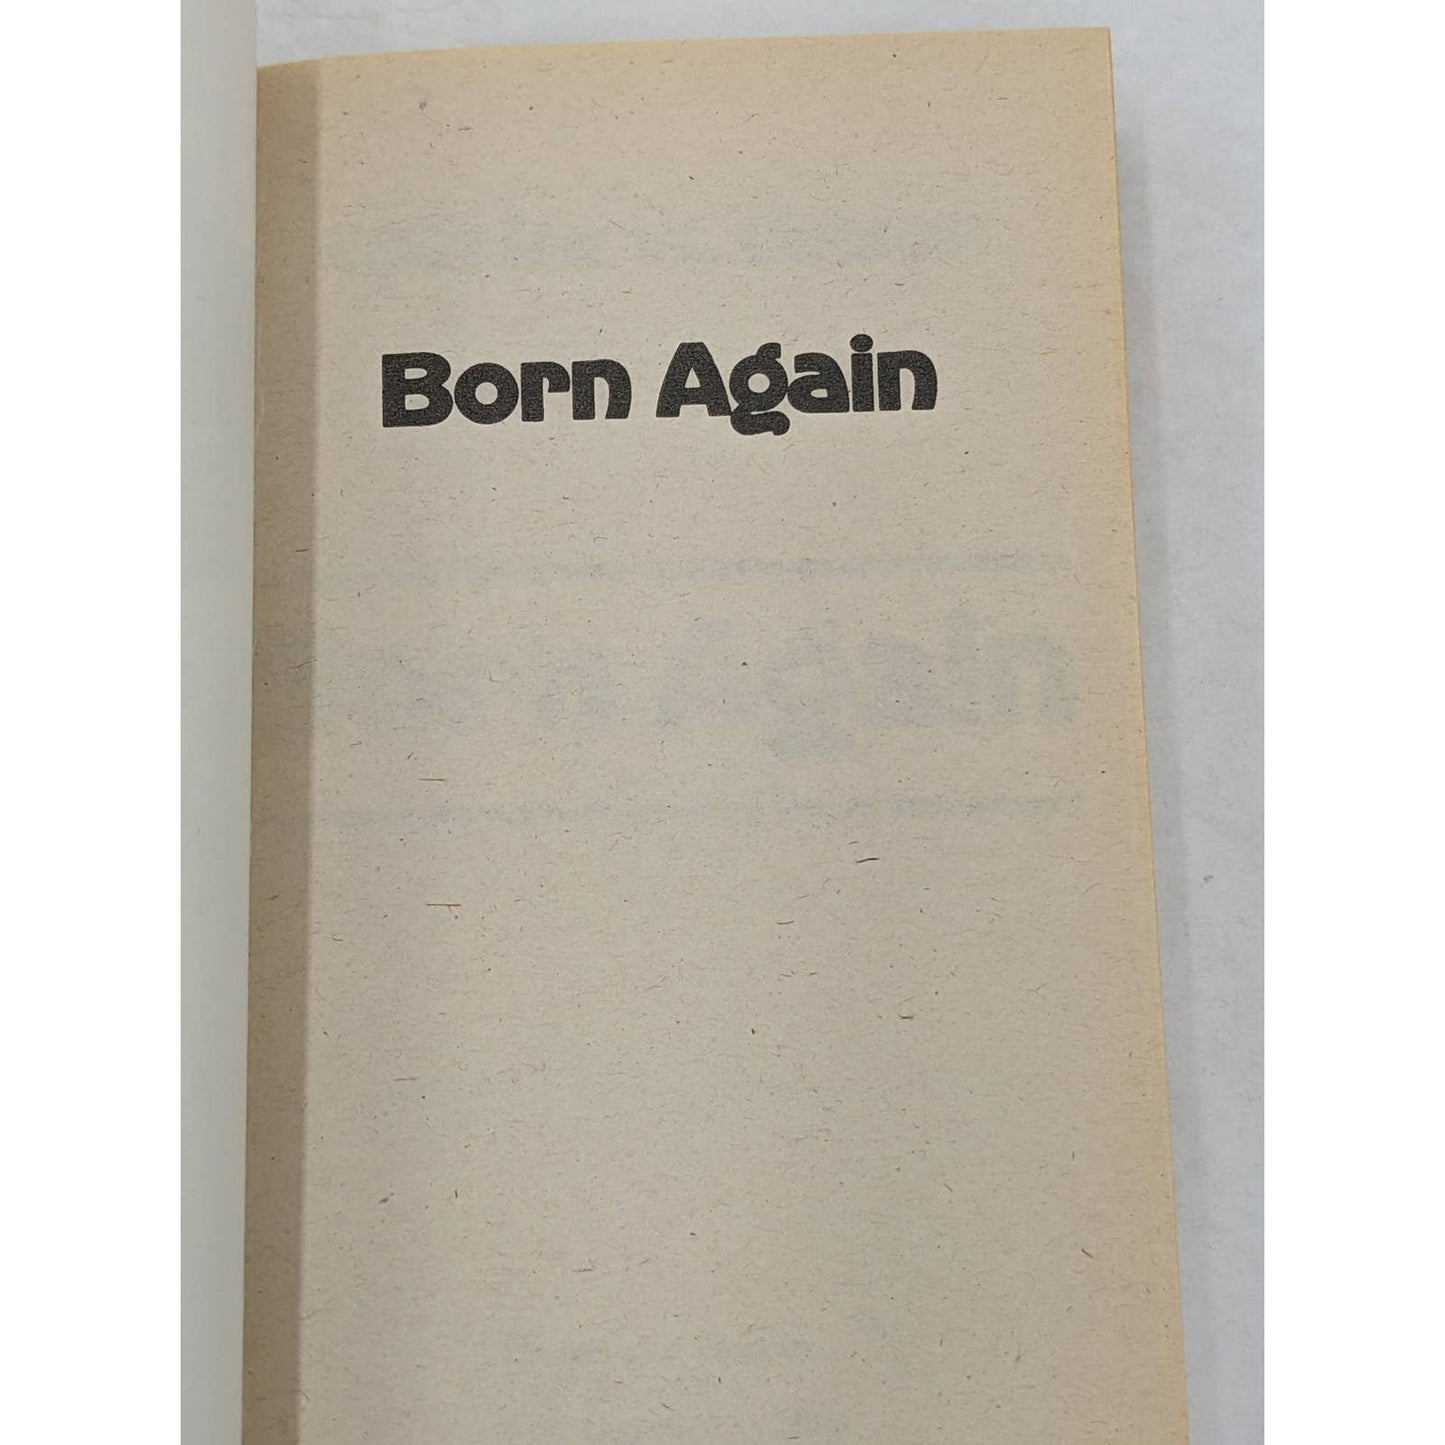 Born Again What Really Happened To The White Hatchet Man By Charles W. Colson